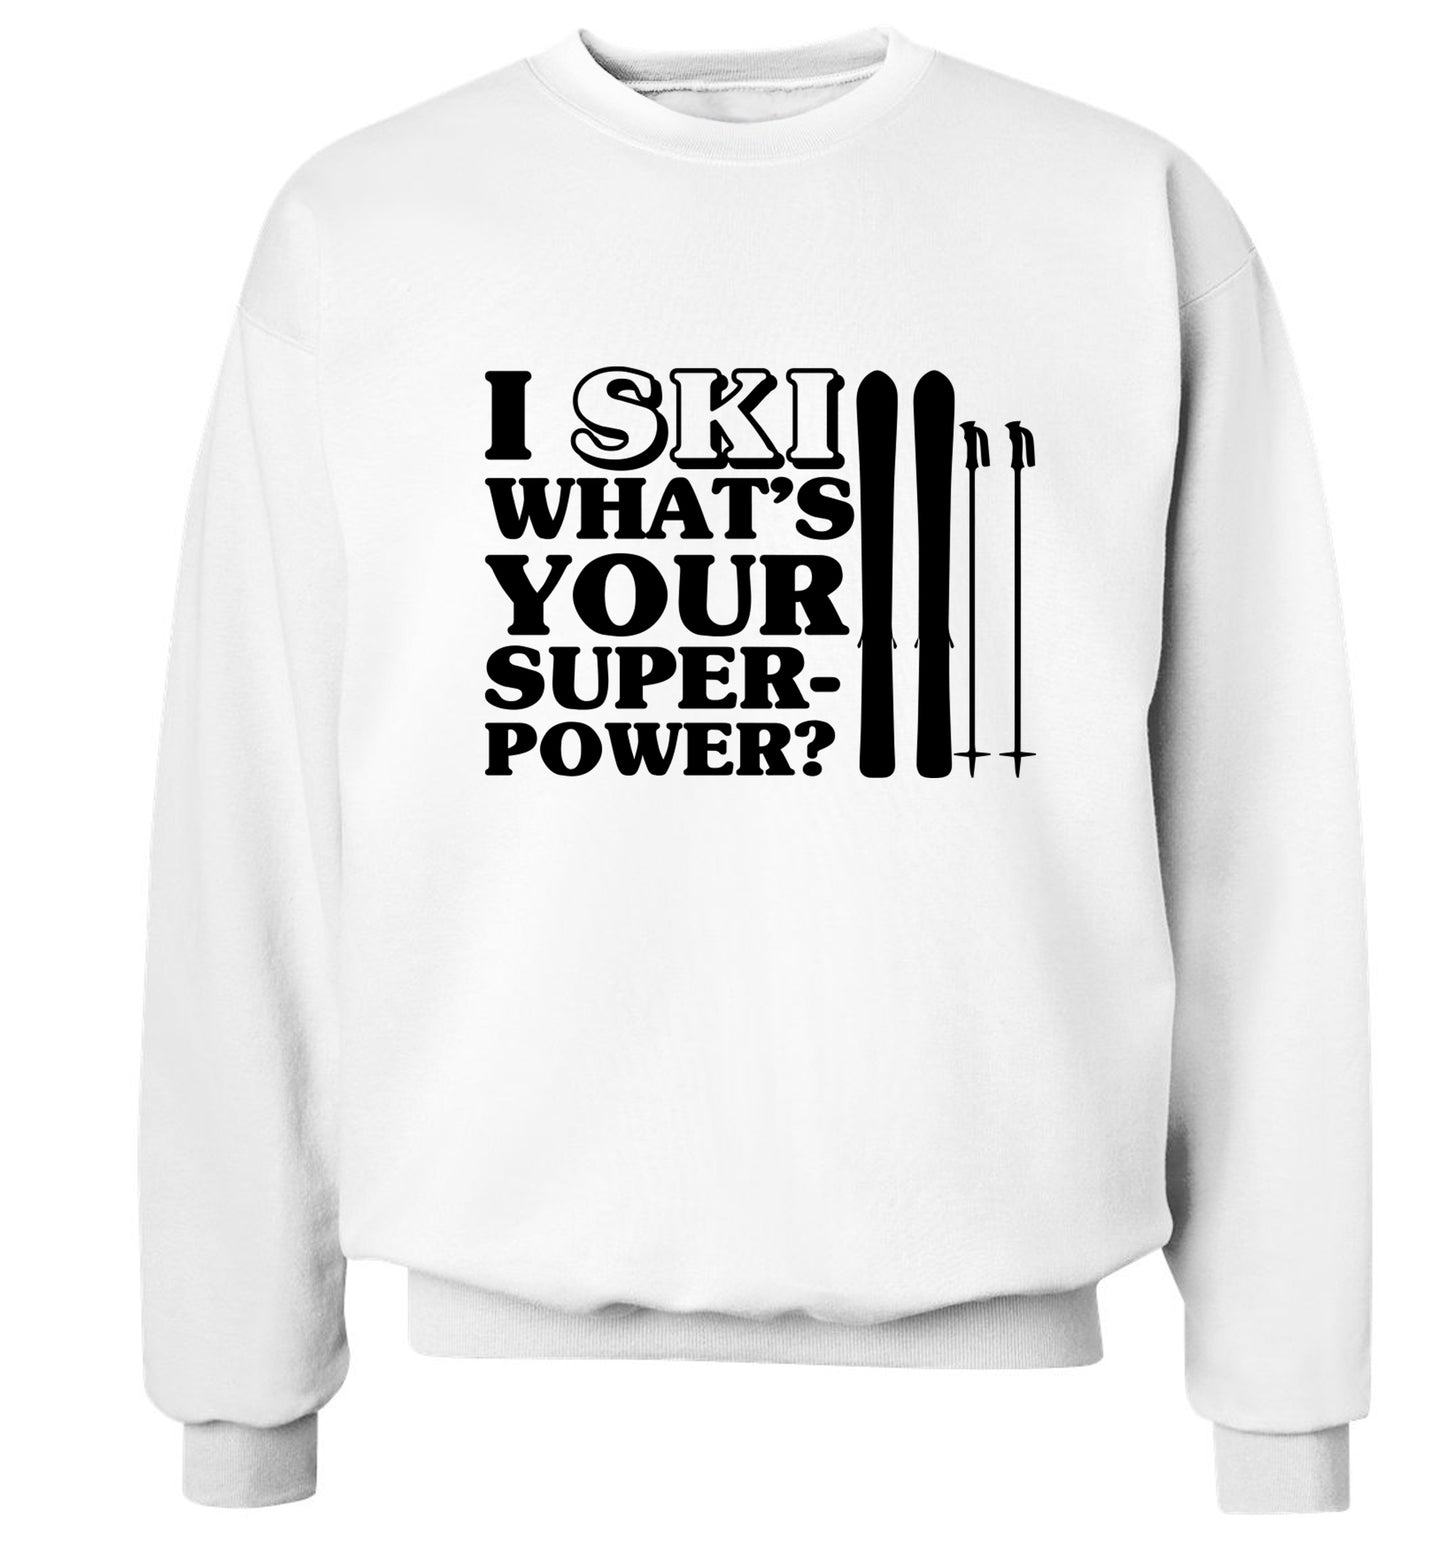 I ski what's your superpower? Adult's unisexwhite Sweater 2XL